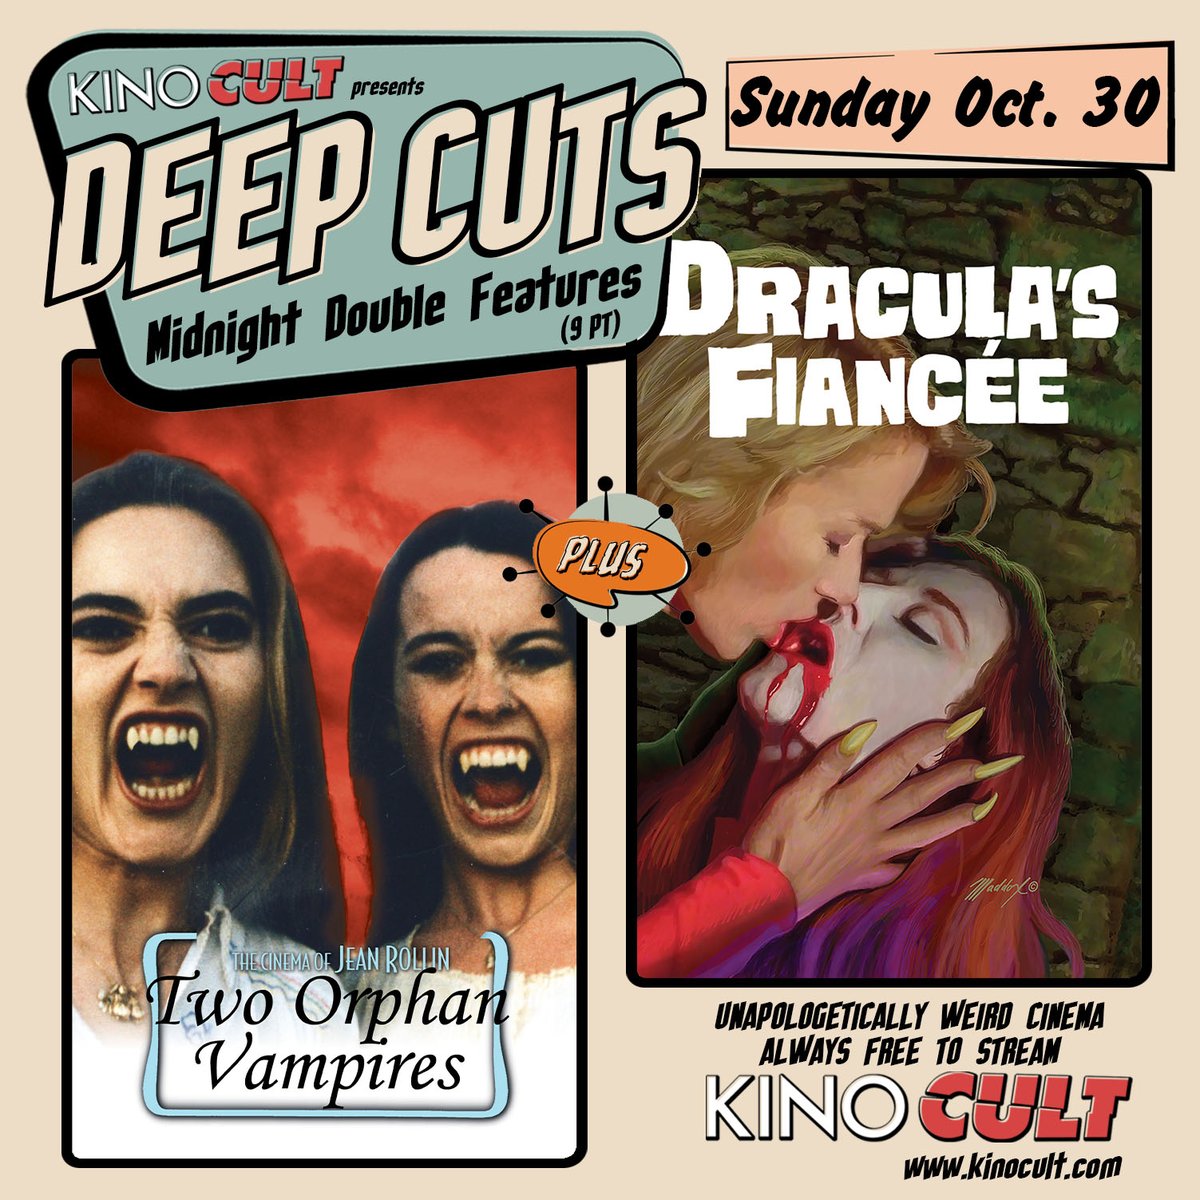 Family, Jean Rollin and Vampires. What more do you need in a double-feature. Day 30 of DEEP CUTS is Jean Rollin’s TWO ORPHAN VAMPIRES and DRACULA’S FIANCEE